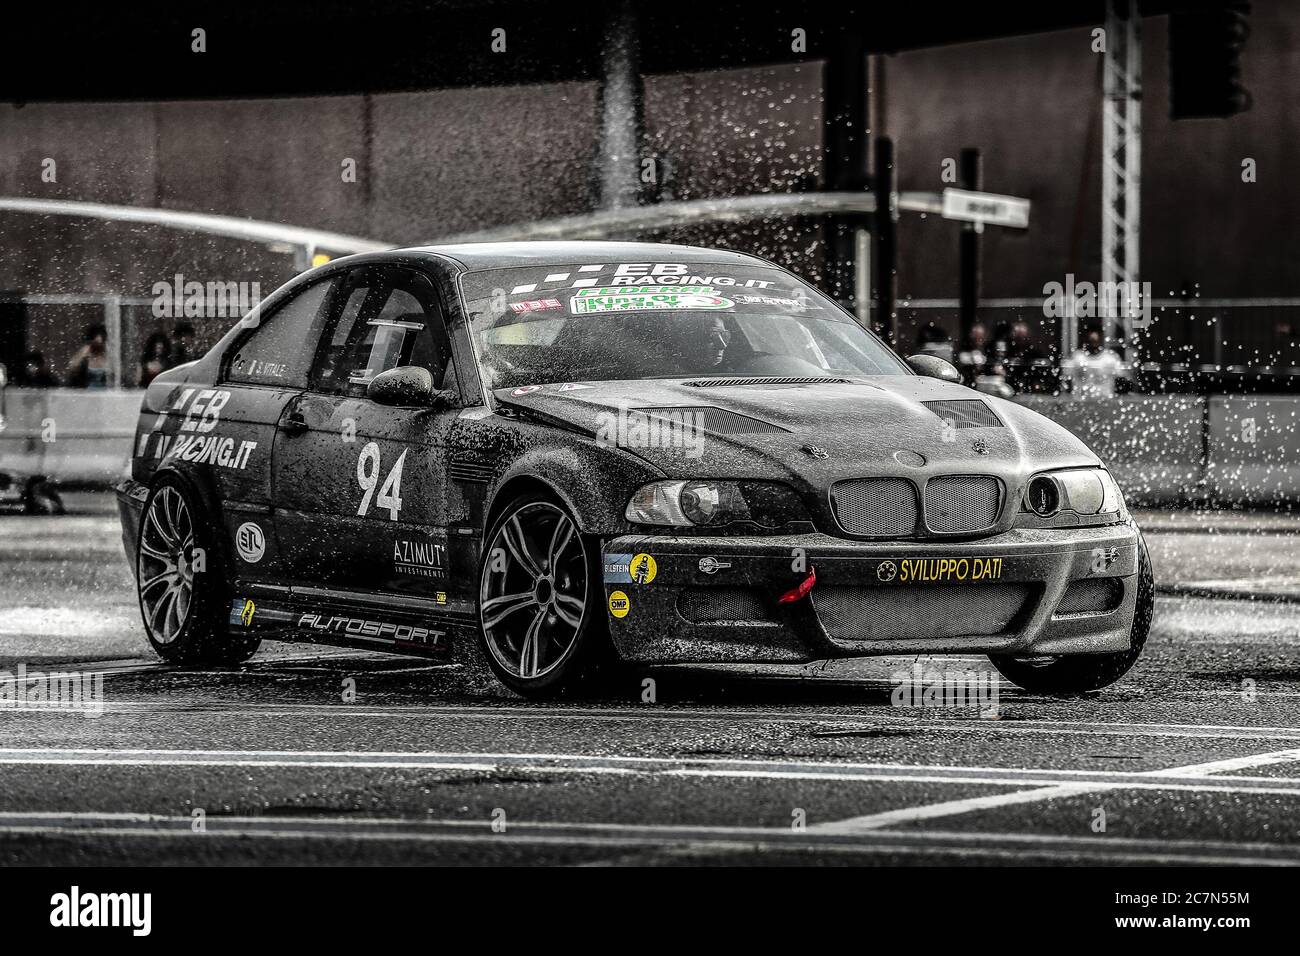 Milan, Italy, June 02, 2018:black BMW racing car in action during the 1st Drift Show Il Destriero at the Iper Drive in Milan. Stock Photo